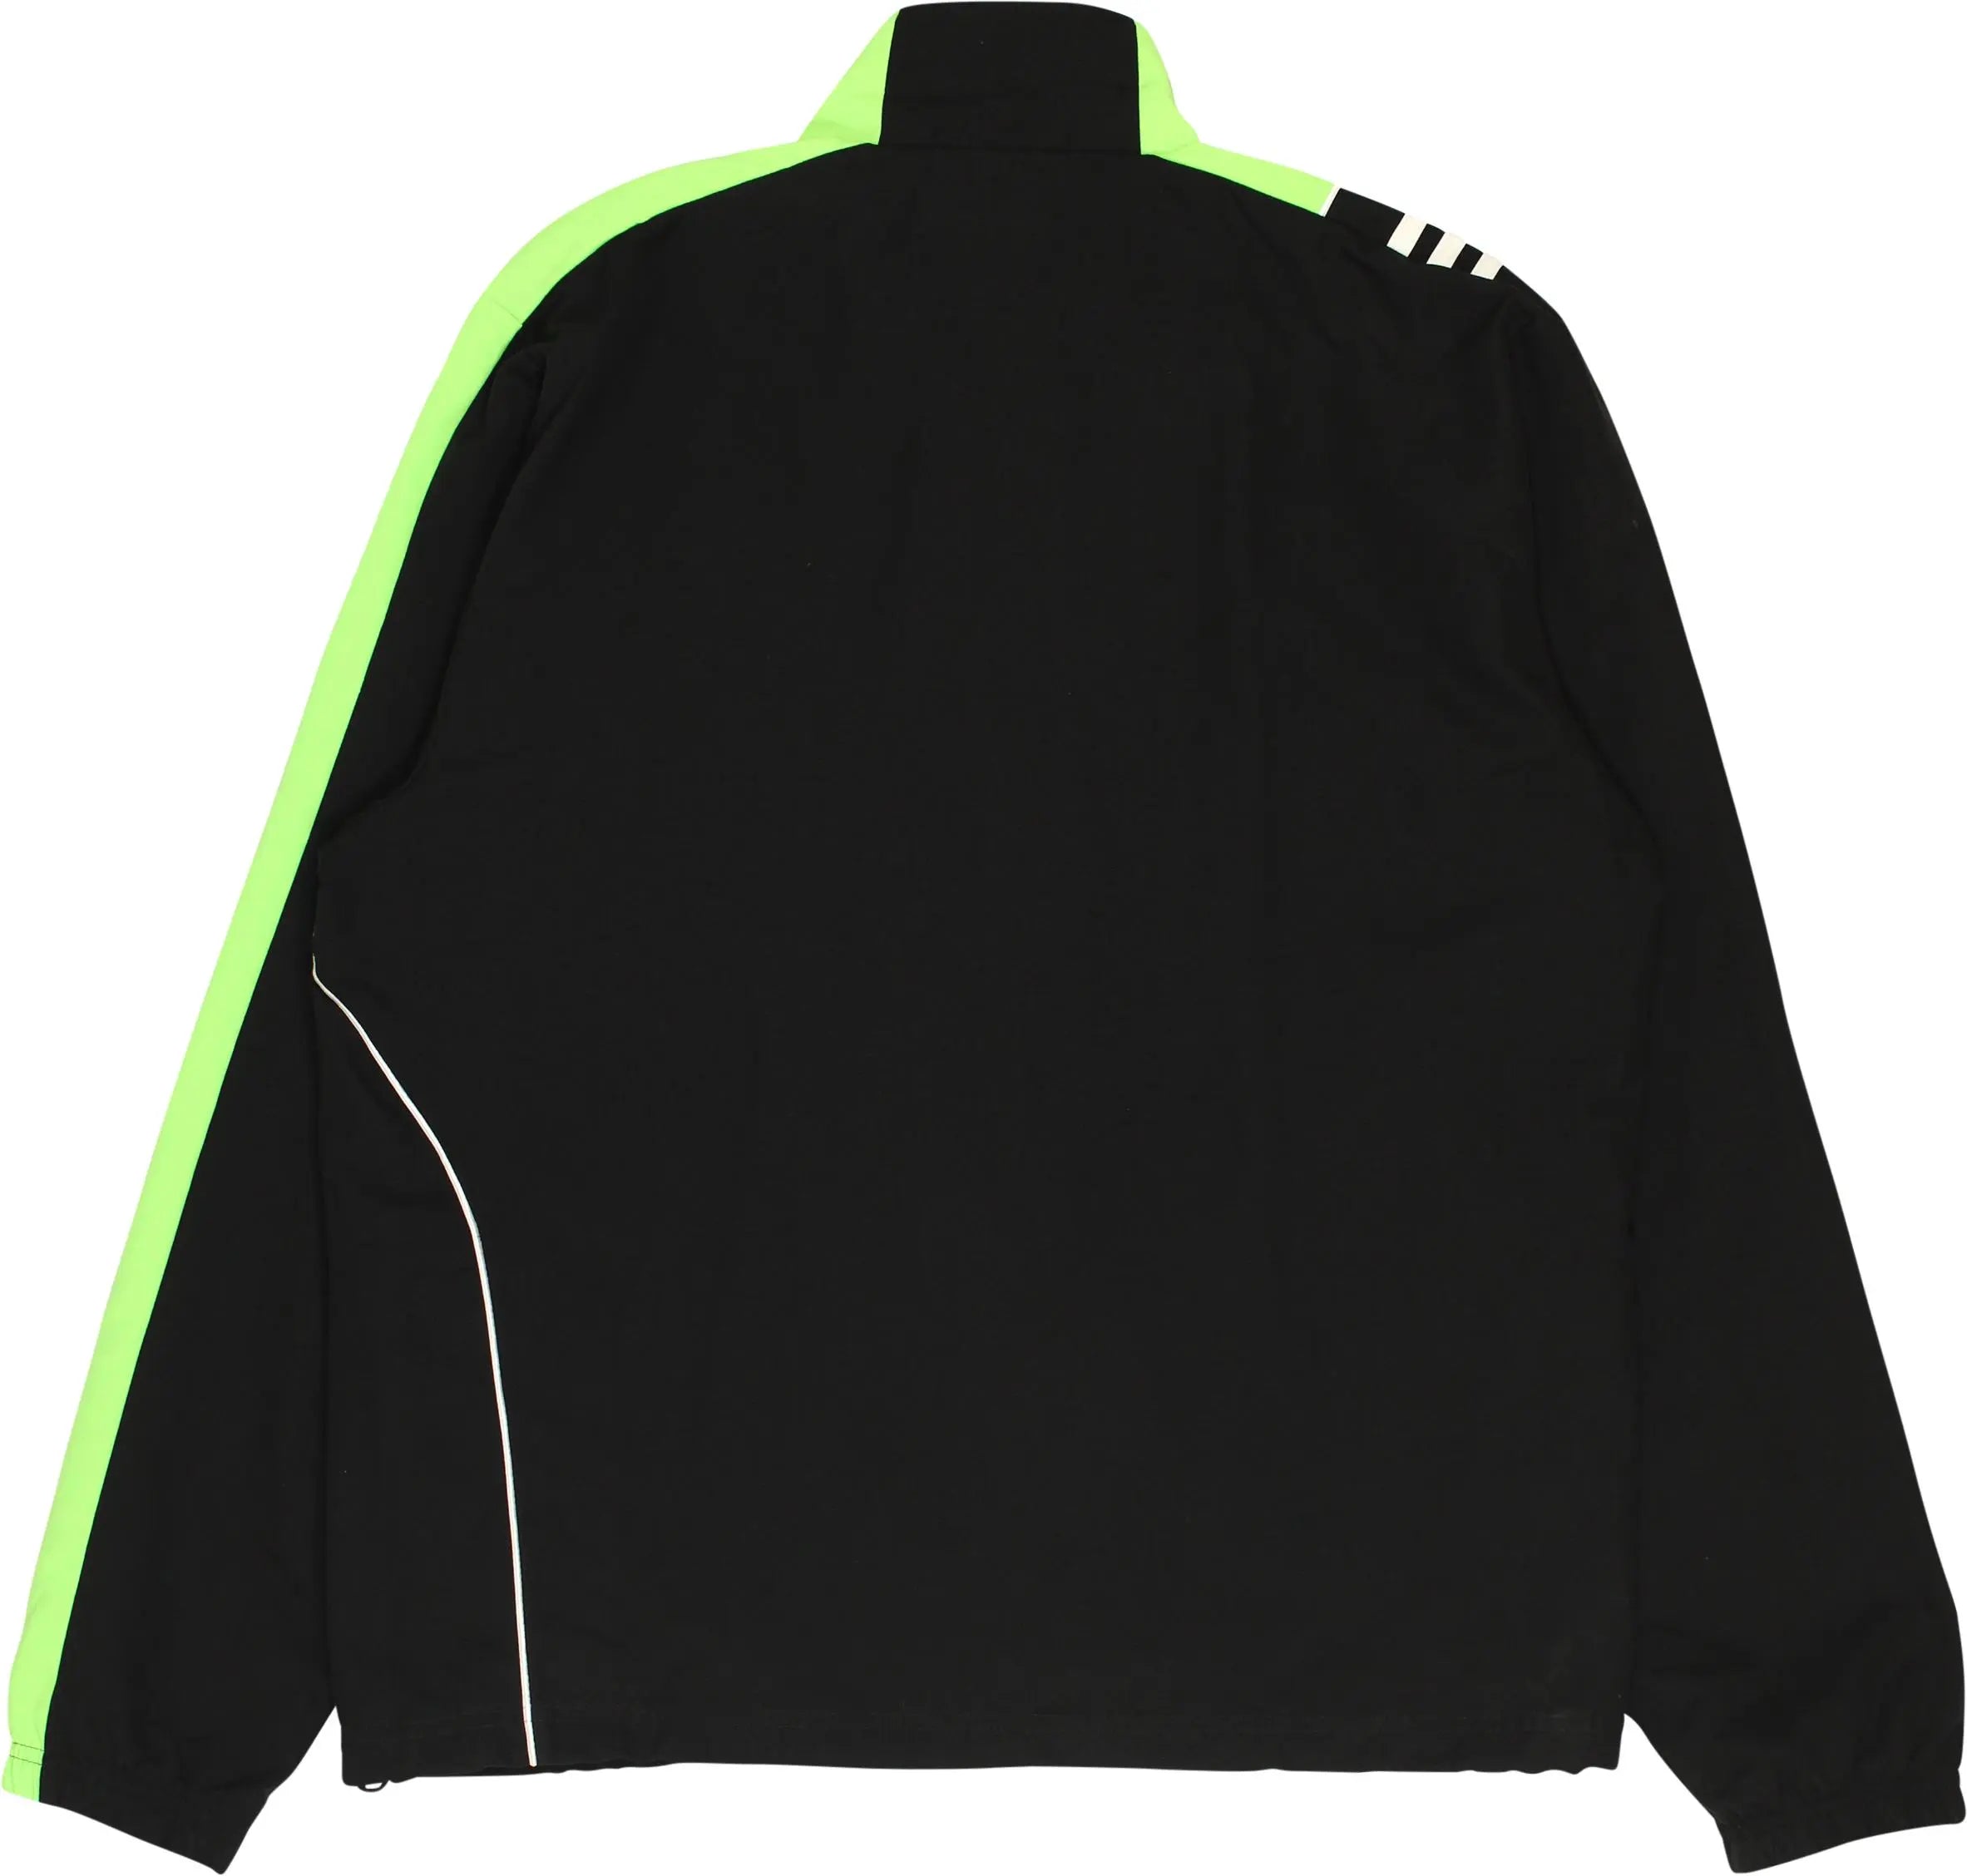 Adidas - Black Track Jacket by Adidas- ThriftTale.com - Vintage and second handclothing